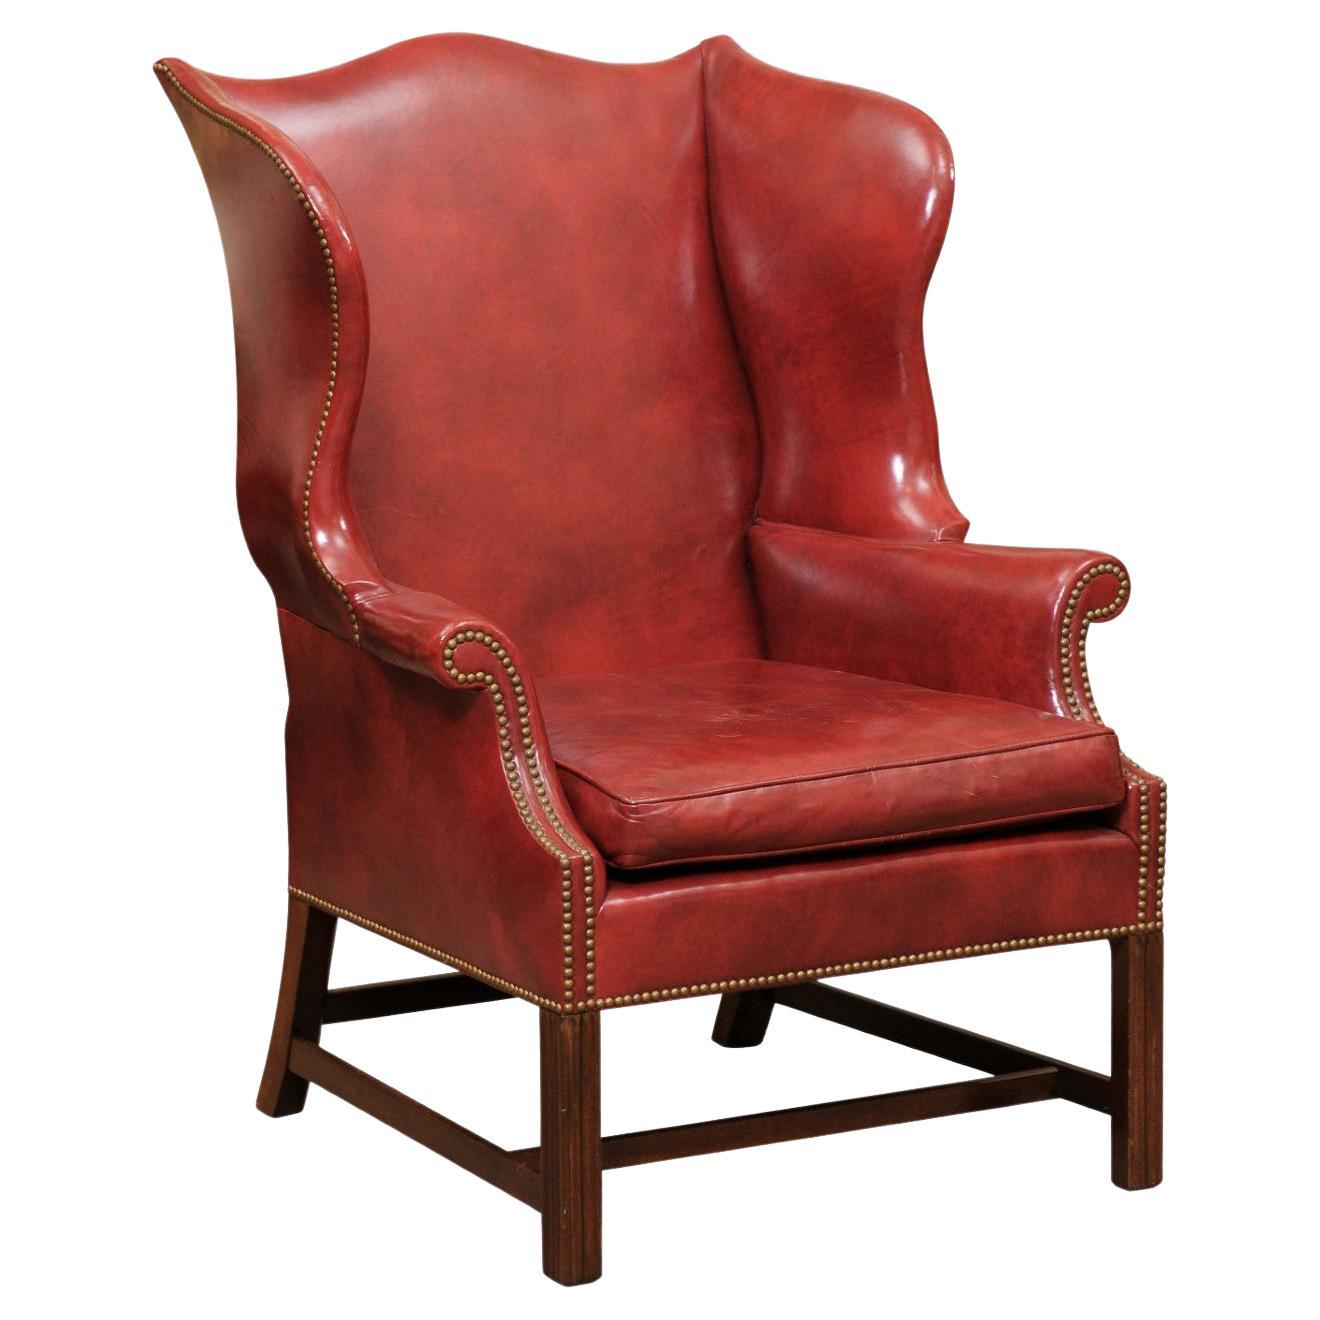 20th Century English Wing Chair in Mahogany & Red Leather Upholstery with Brass 